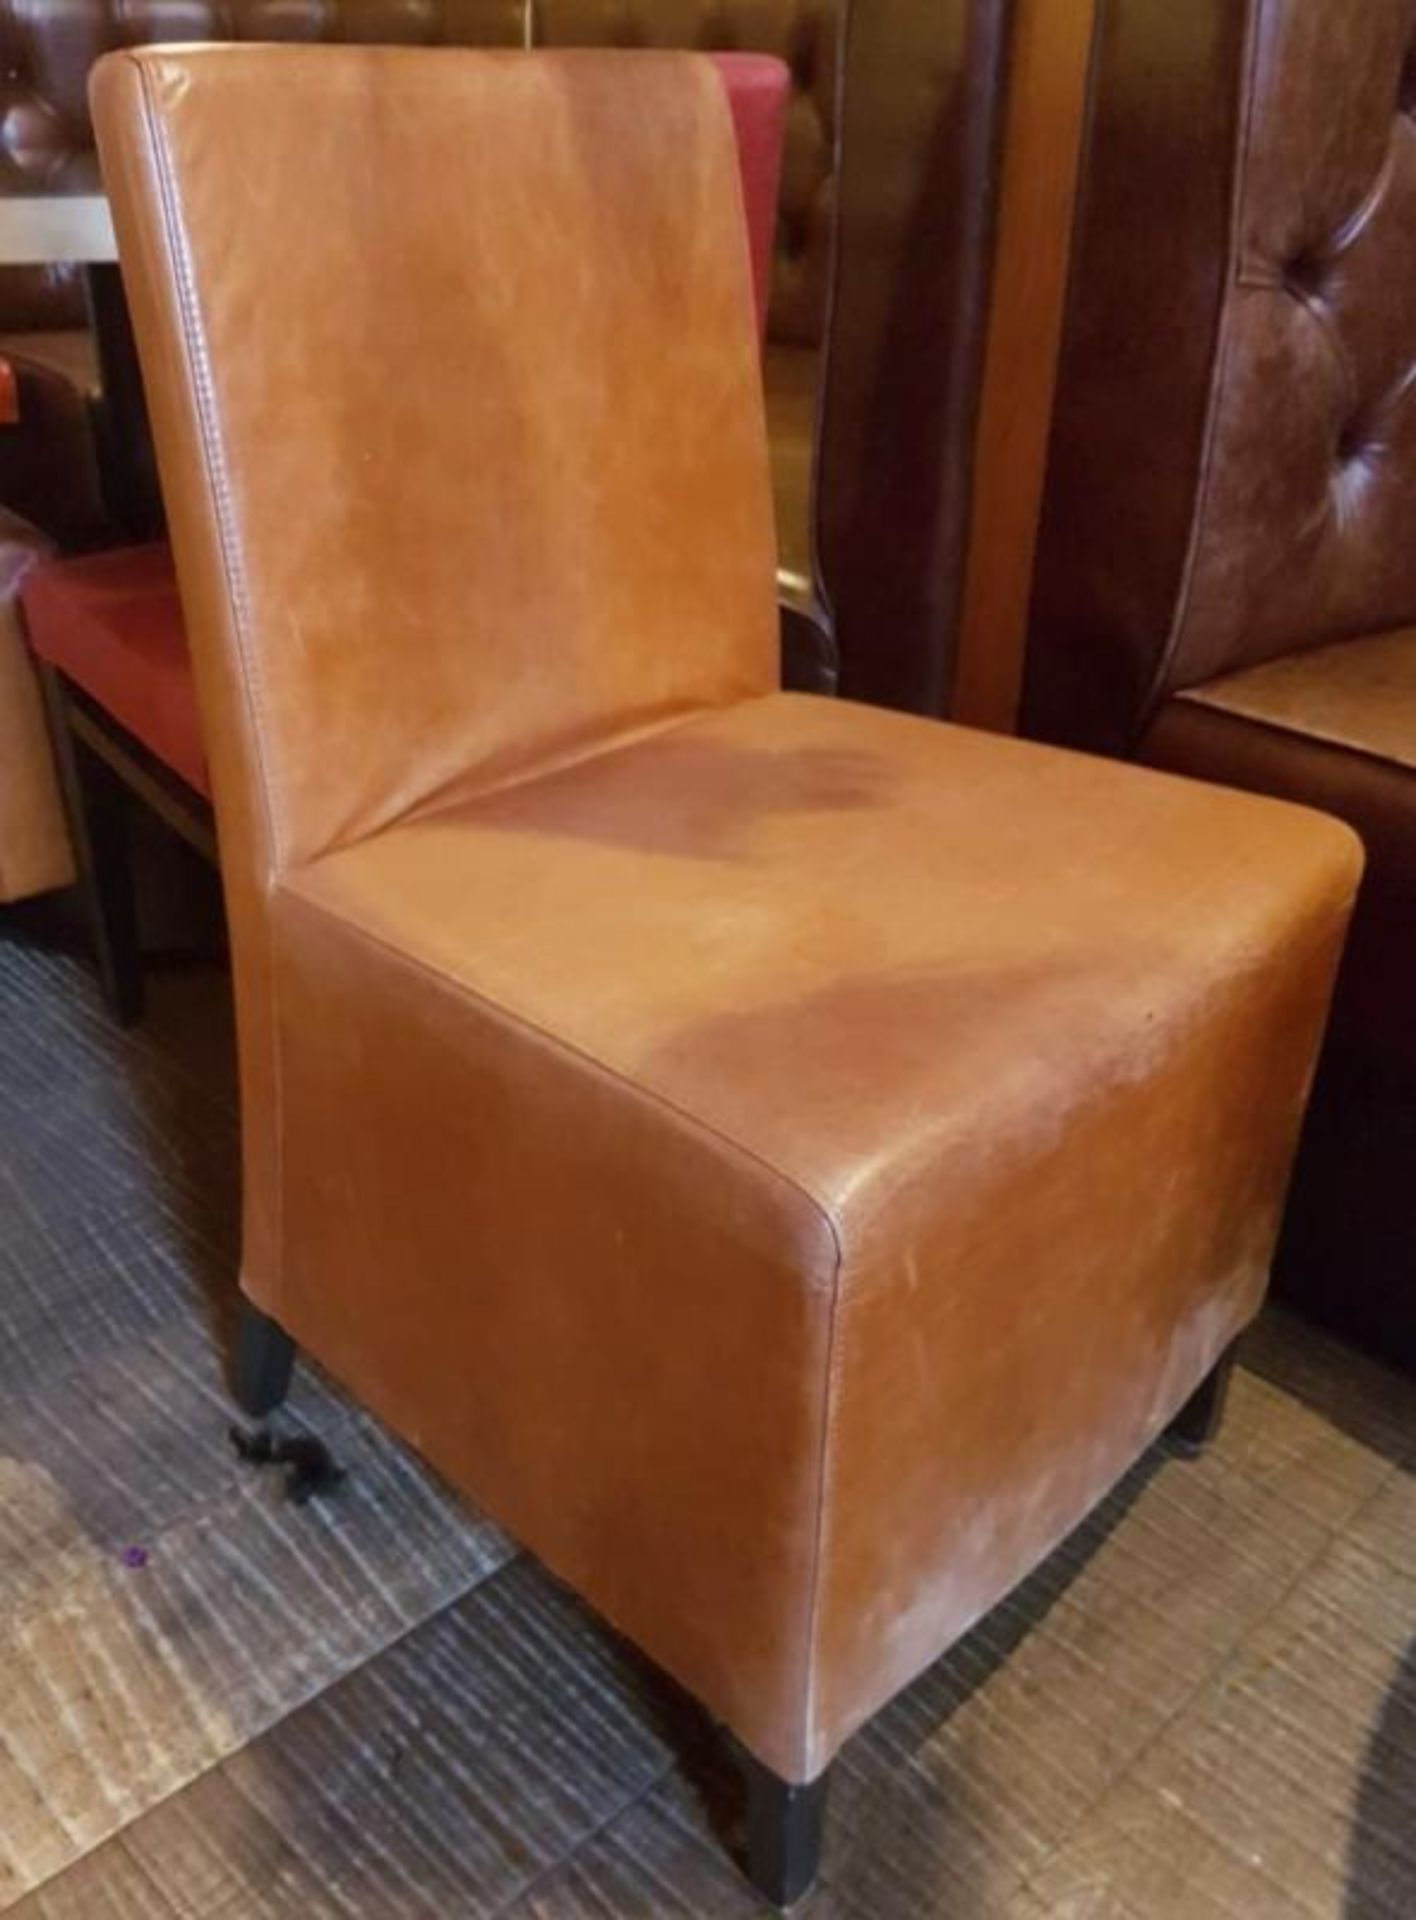 4 x Leather Upholstered Chairs In Tan - Recently Removed From A City Centre Steakhouse Restaurant - - Image 6 of 6